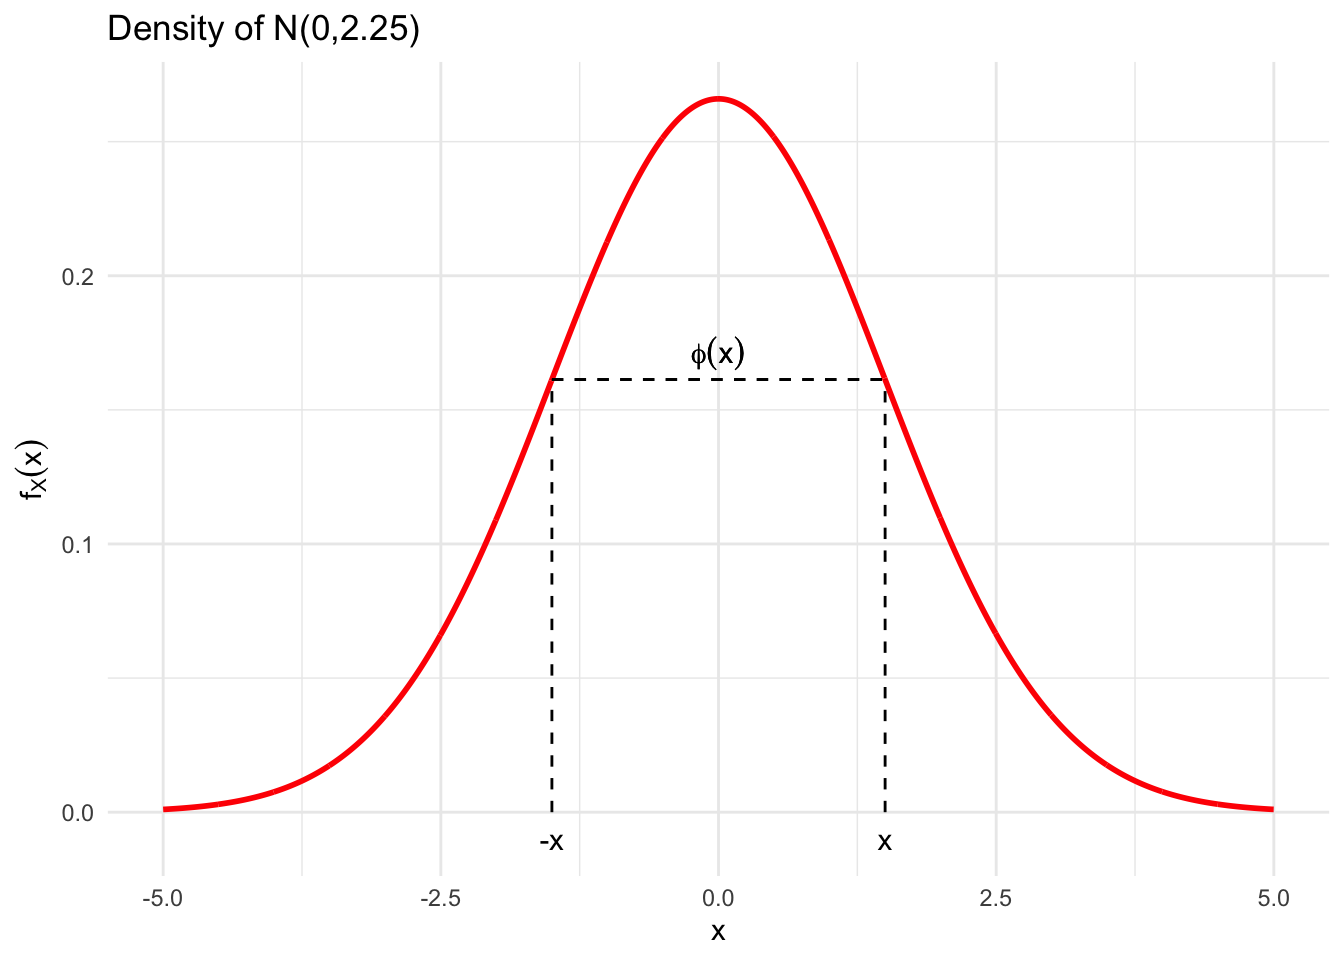 The symmetry of the Gaussian Distribution